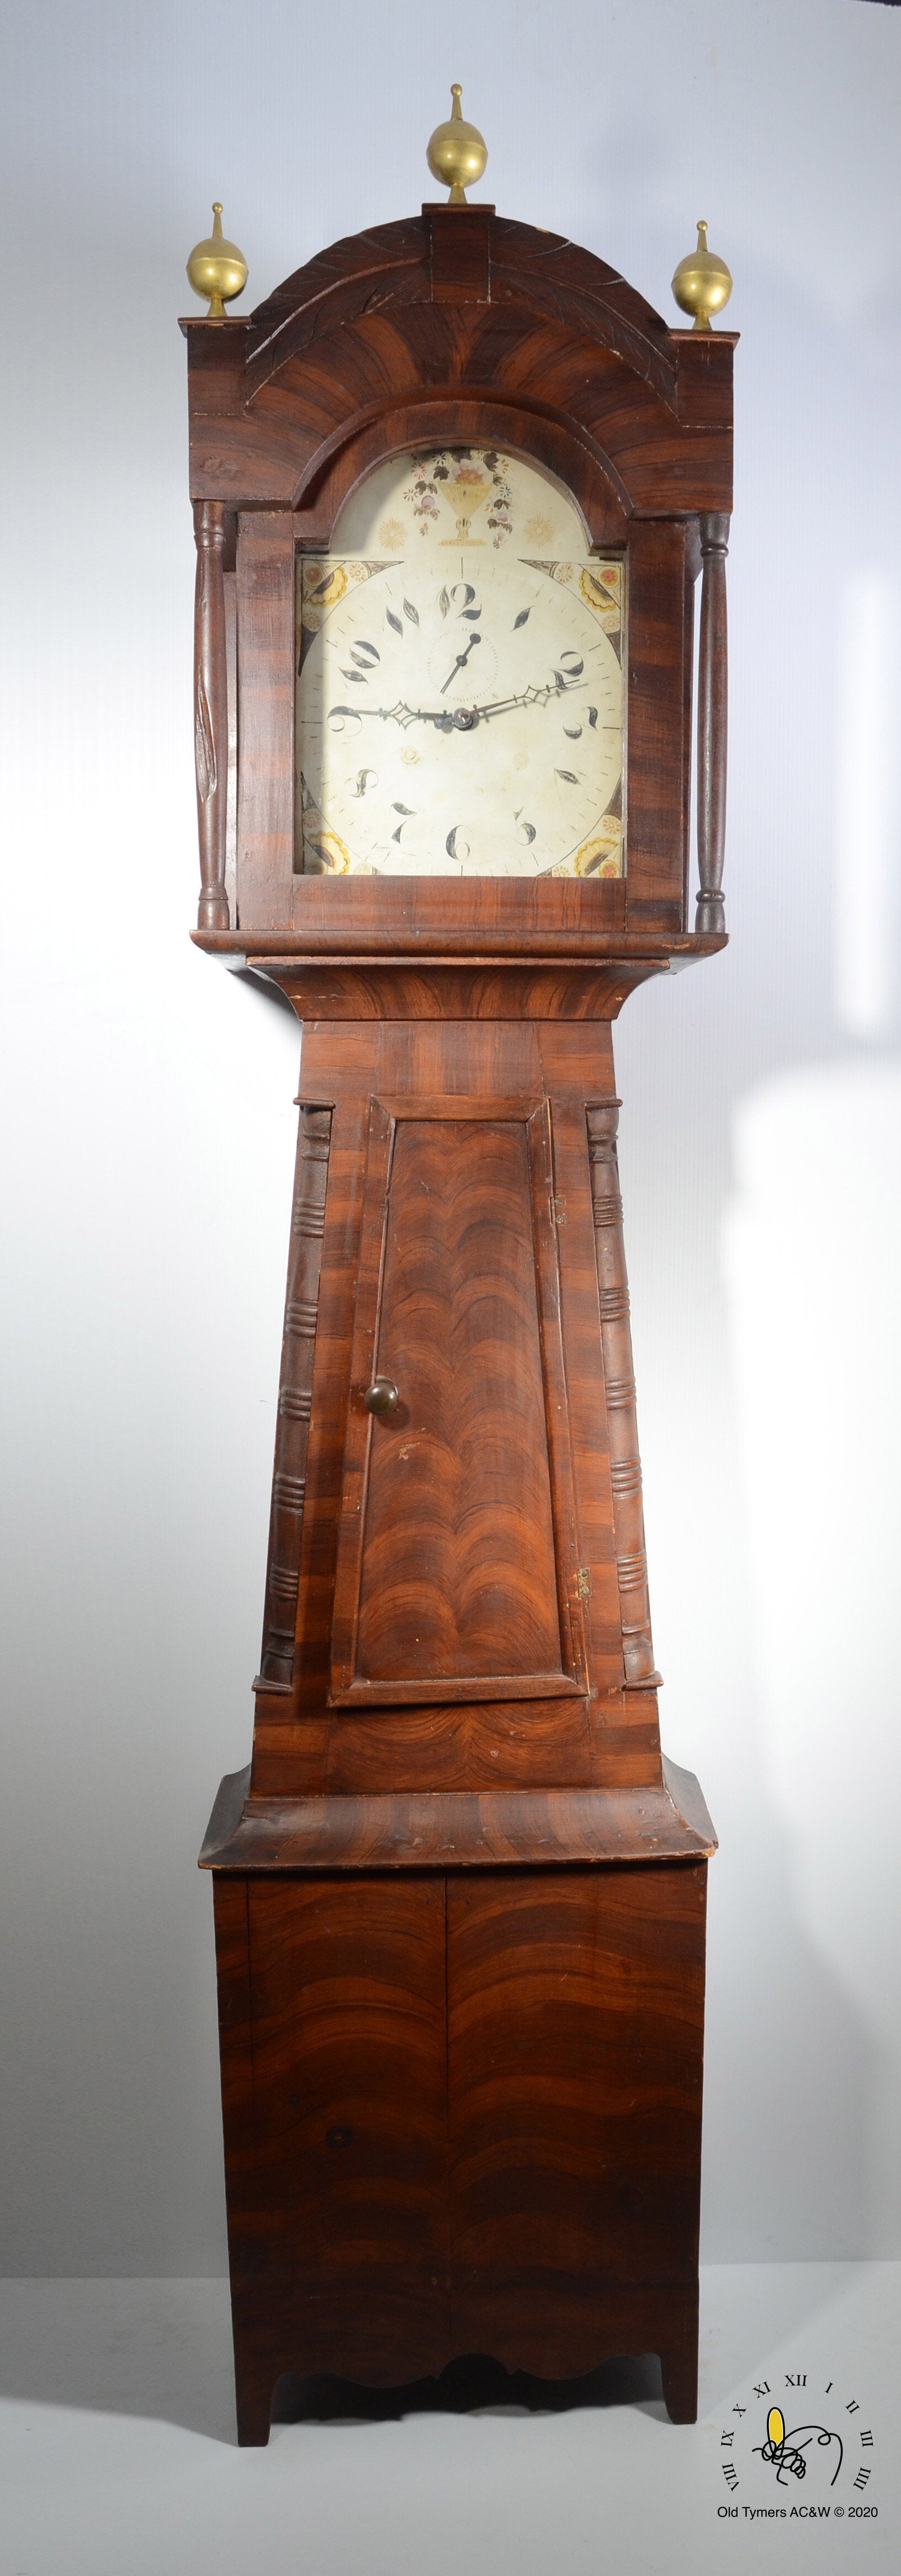 1841 Quebec Style Tall Case Wooden Works Clock